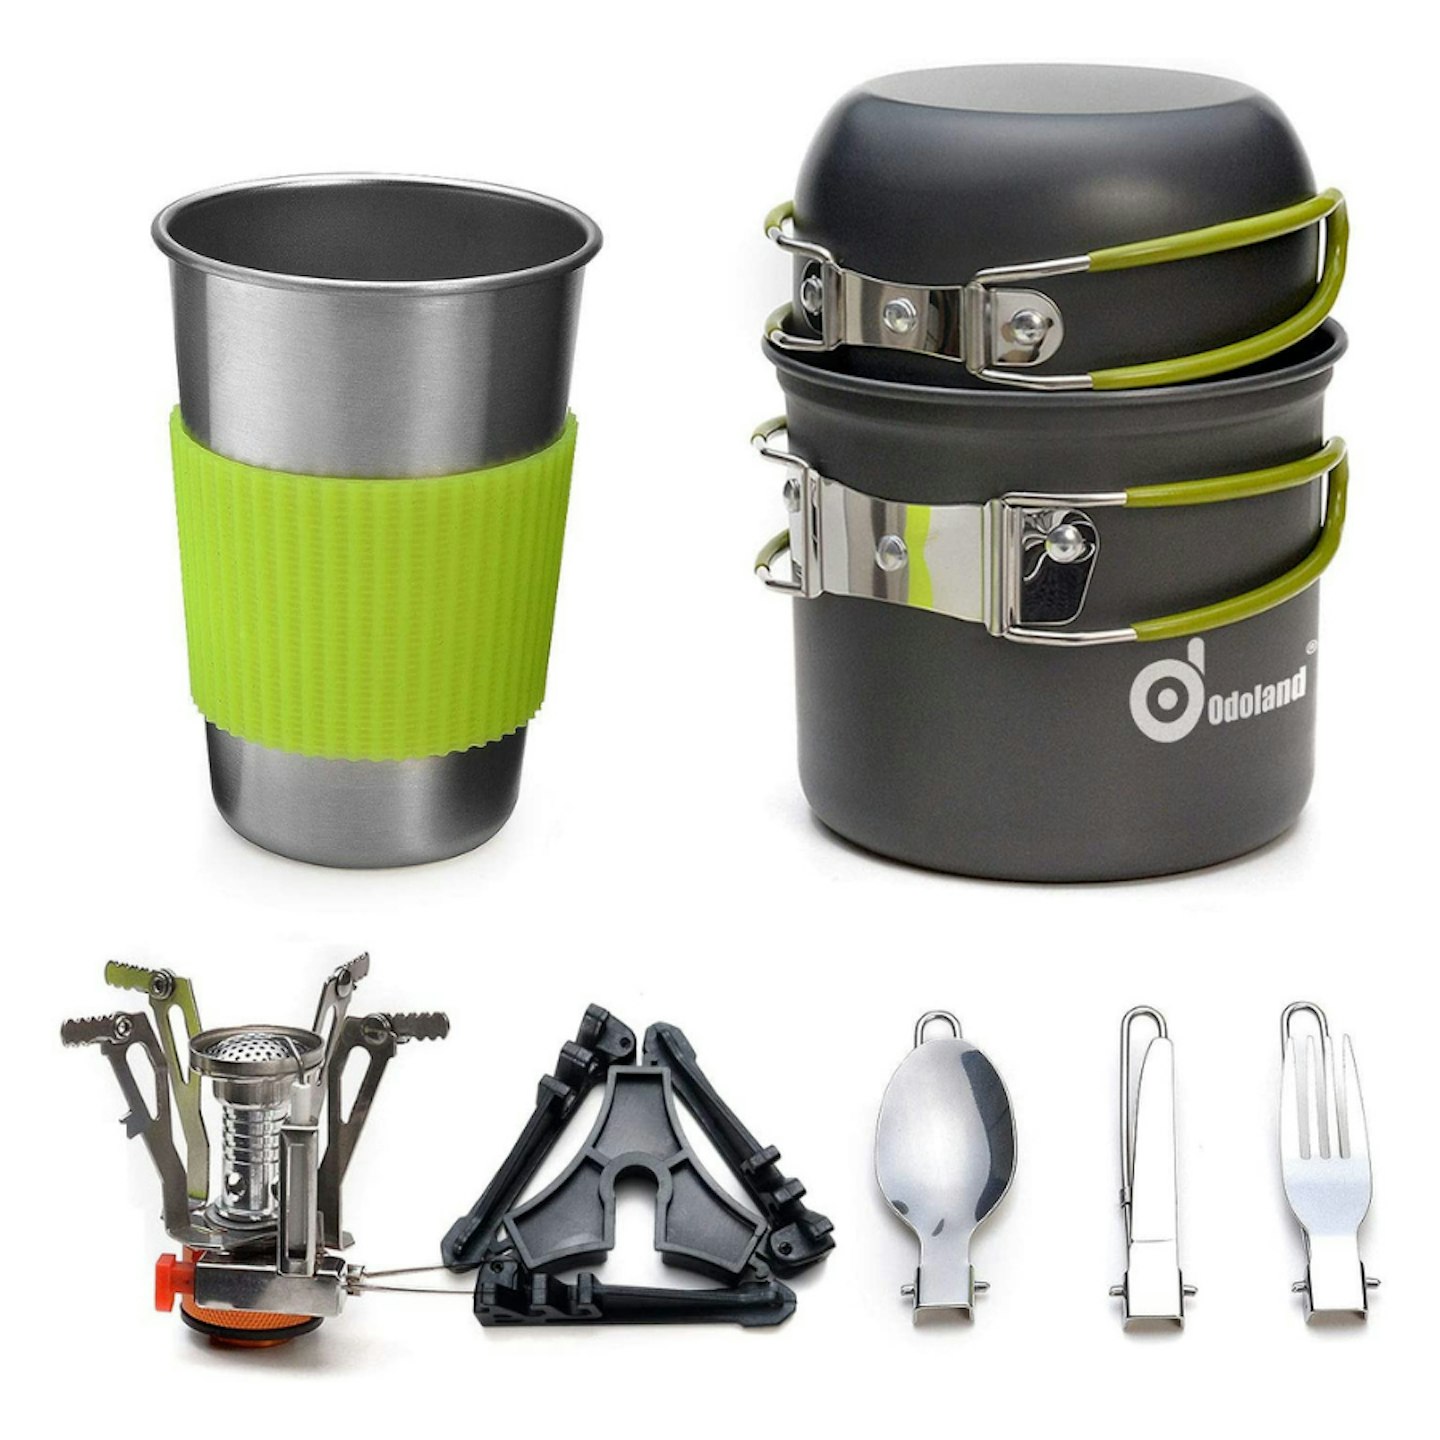 Odoland Camping Cookware Kit with Stove